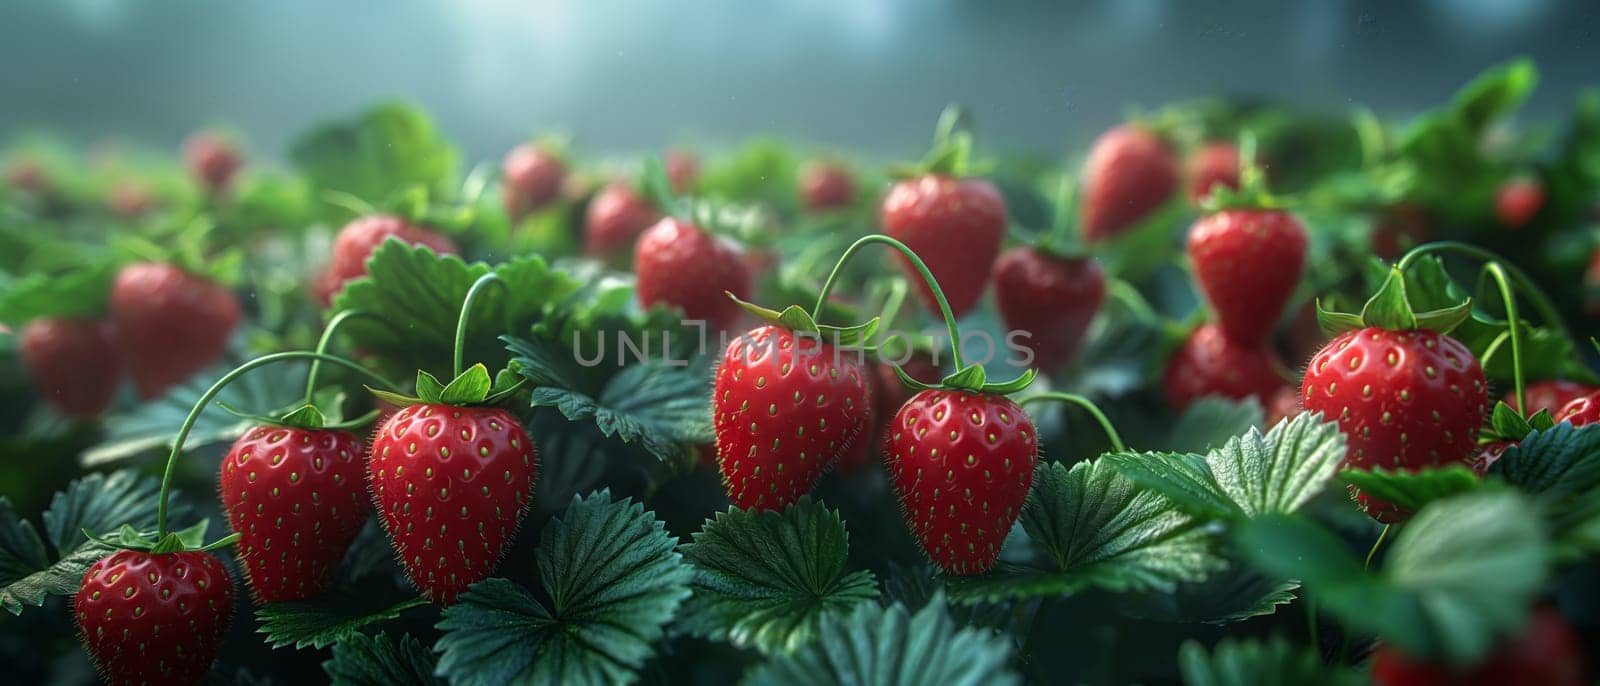 Ripe strawberries with leaves on a dark background. Selective focus.